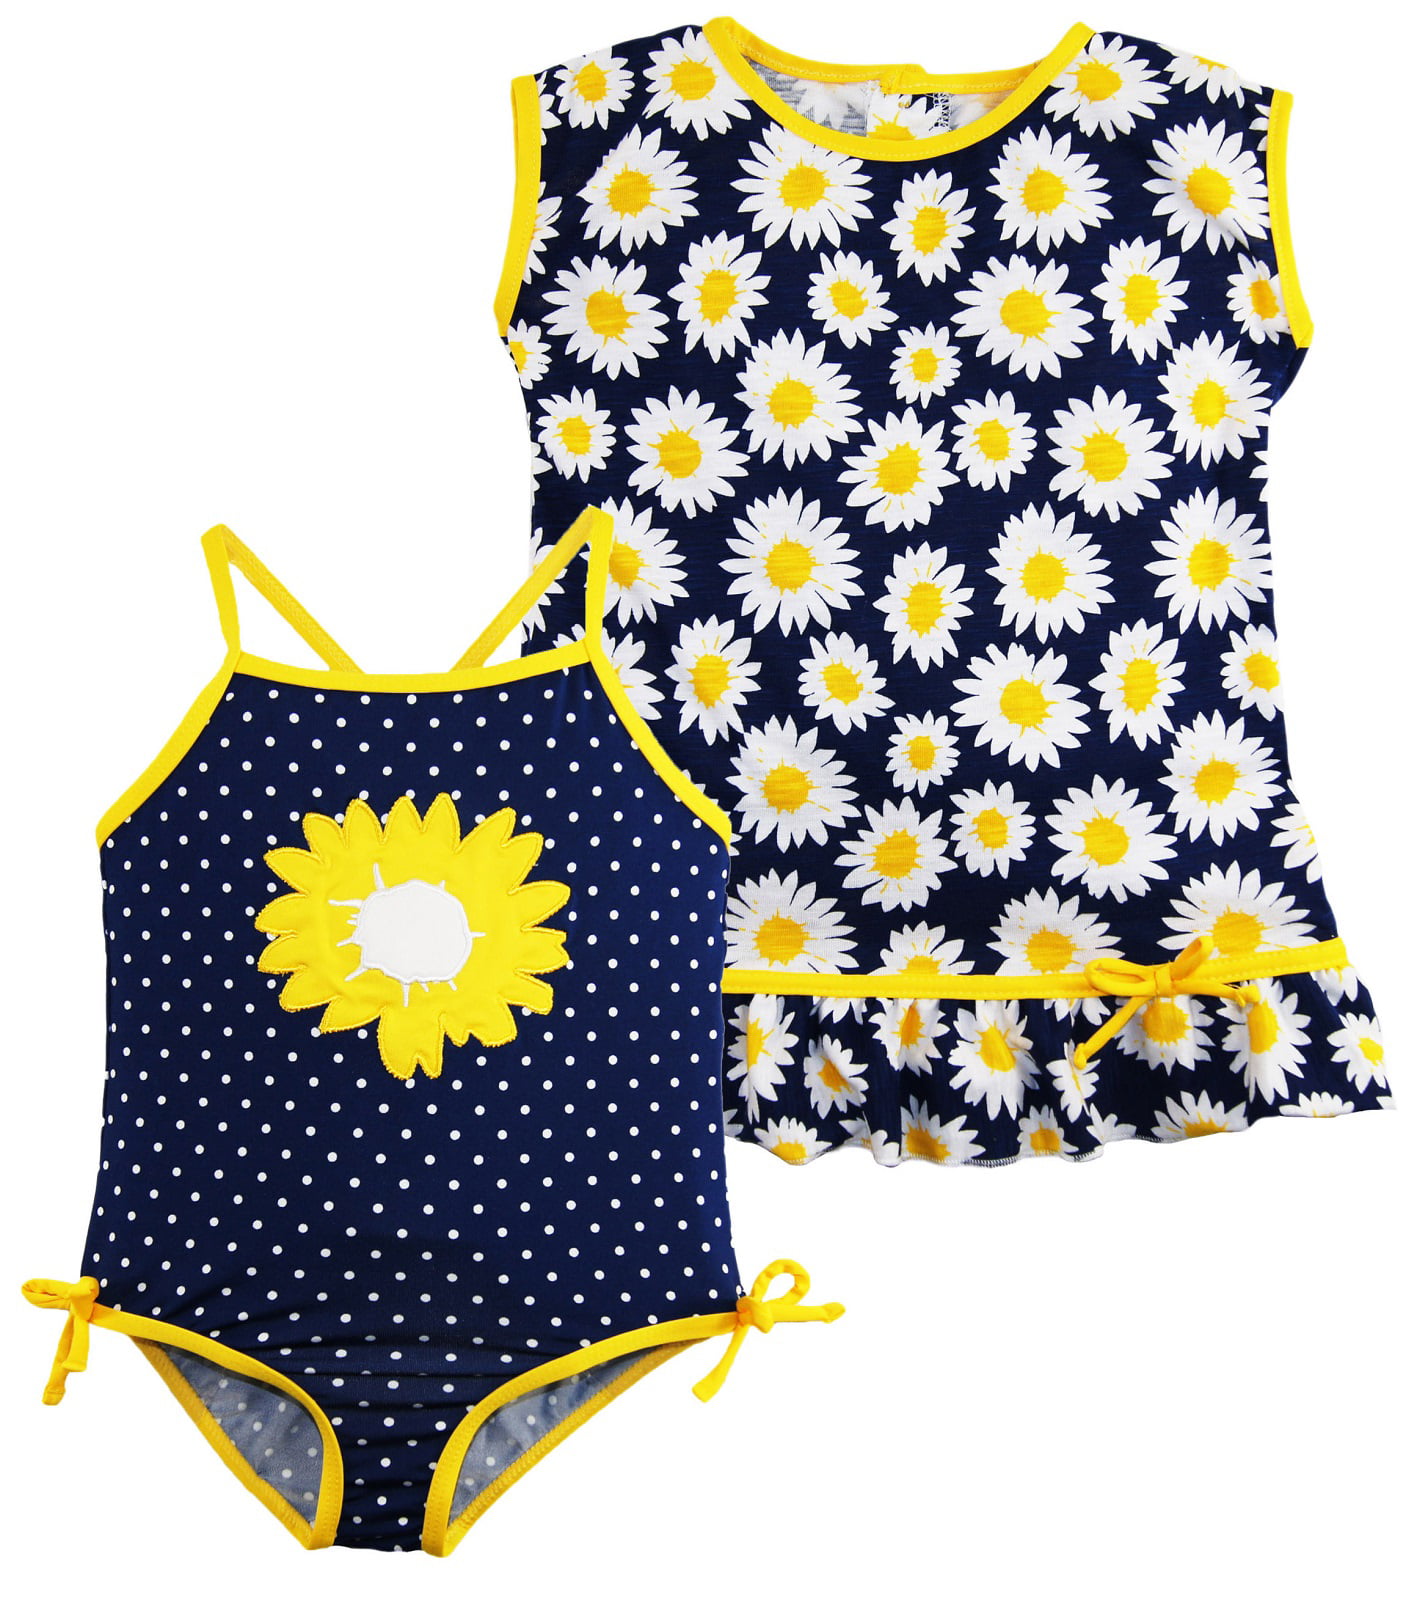 Wippette Girls' 1-Piece Swimsuit with Cover-Up 